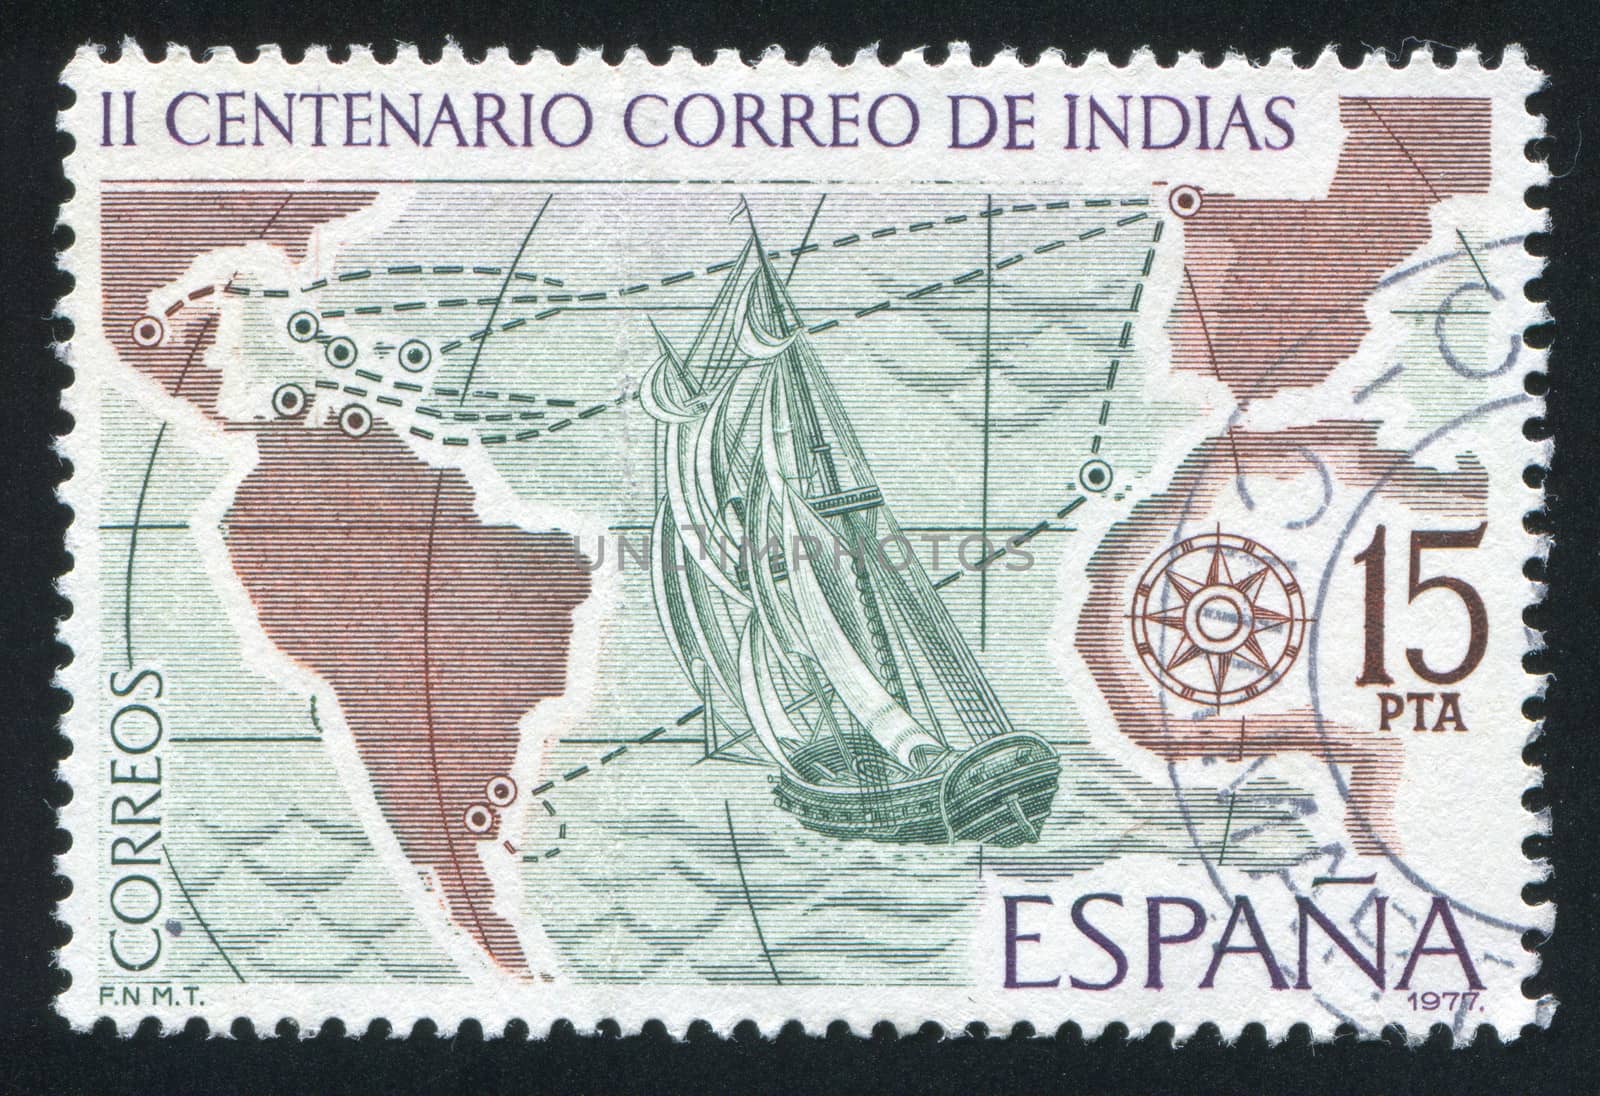 SPAIN - CIRCA 1977: stamp printed by Spain, shows Sailing Ship and Mail Routes, circa 1977